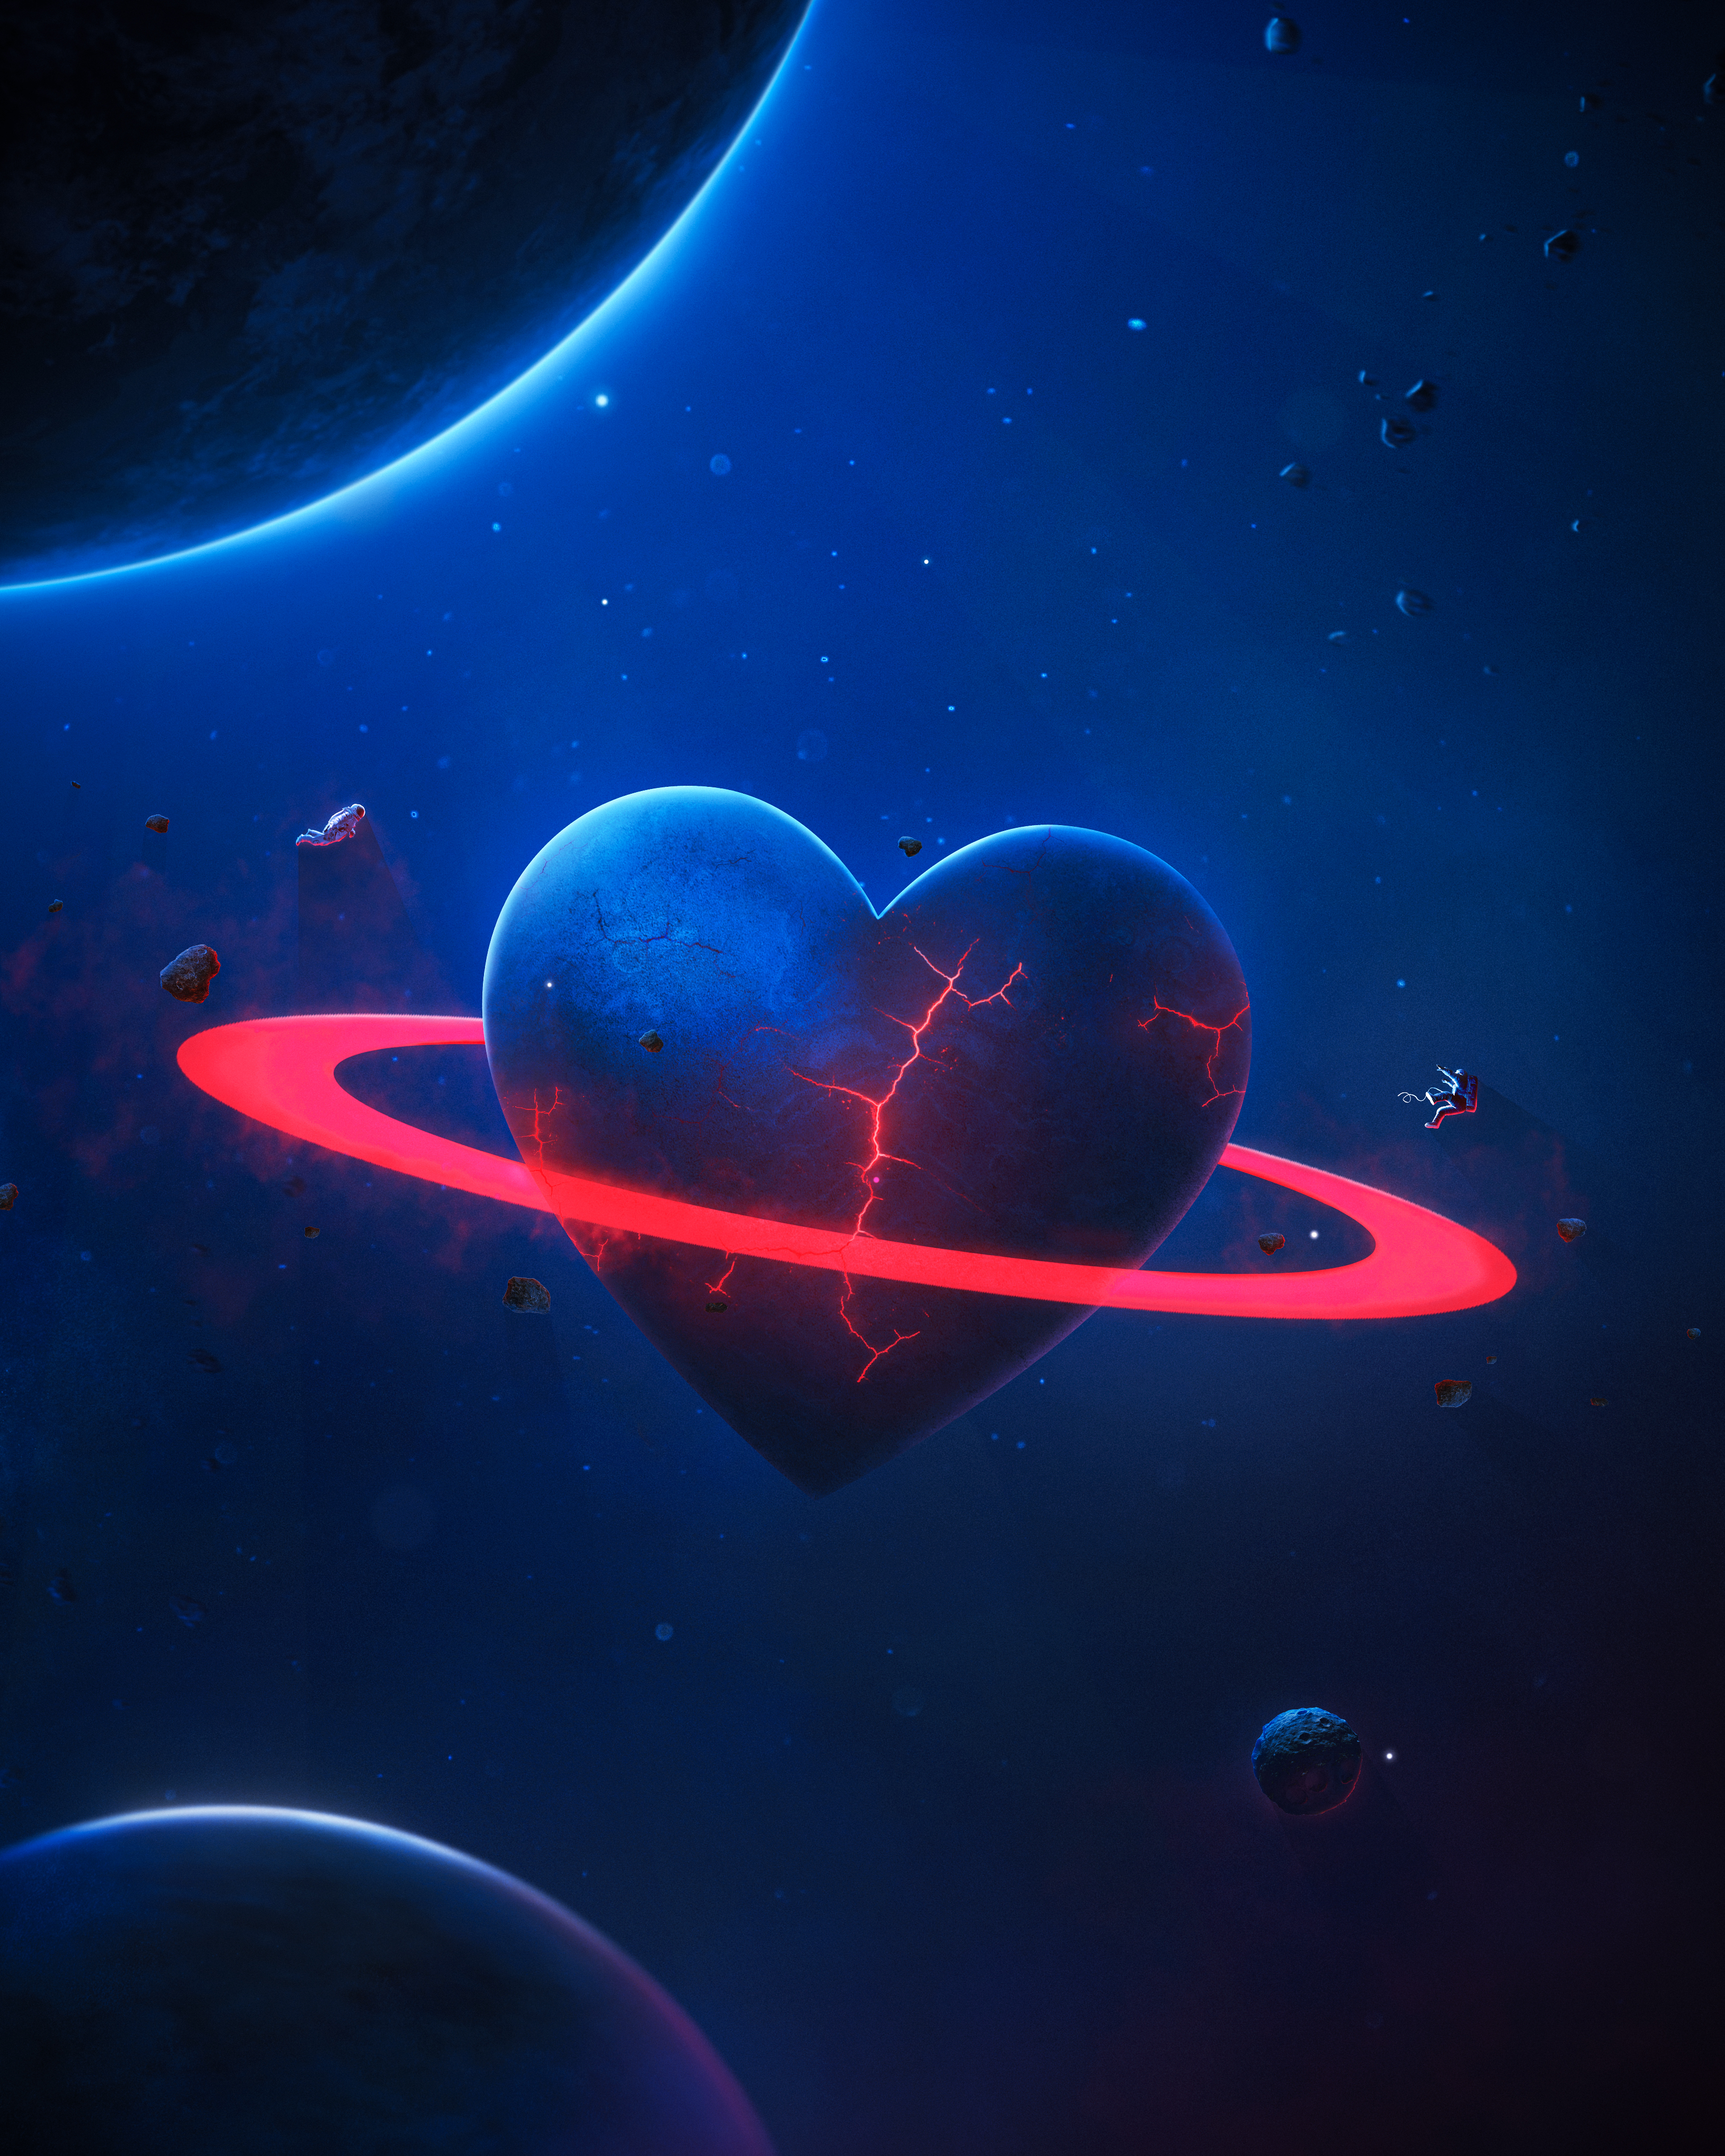 A heart shape planet with a ring around it.